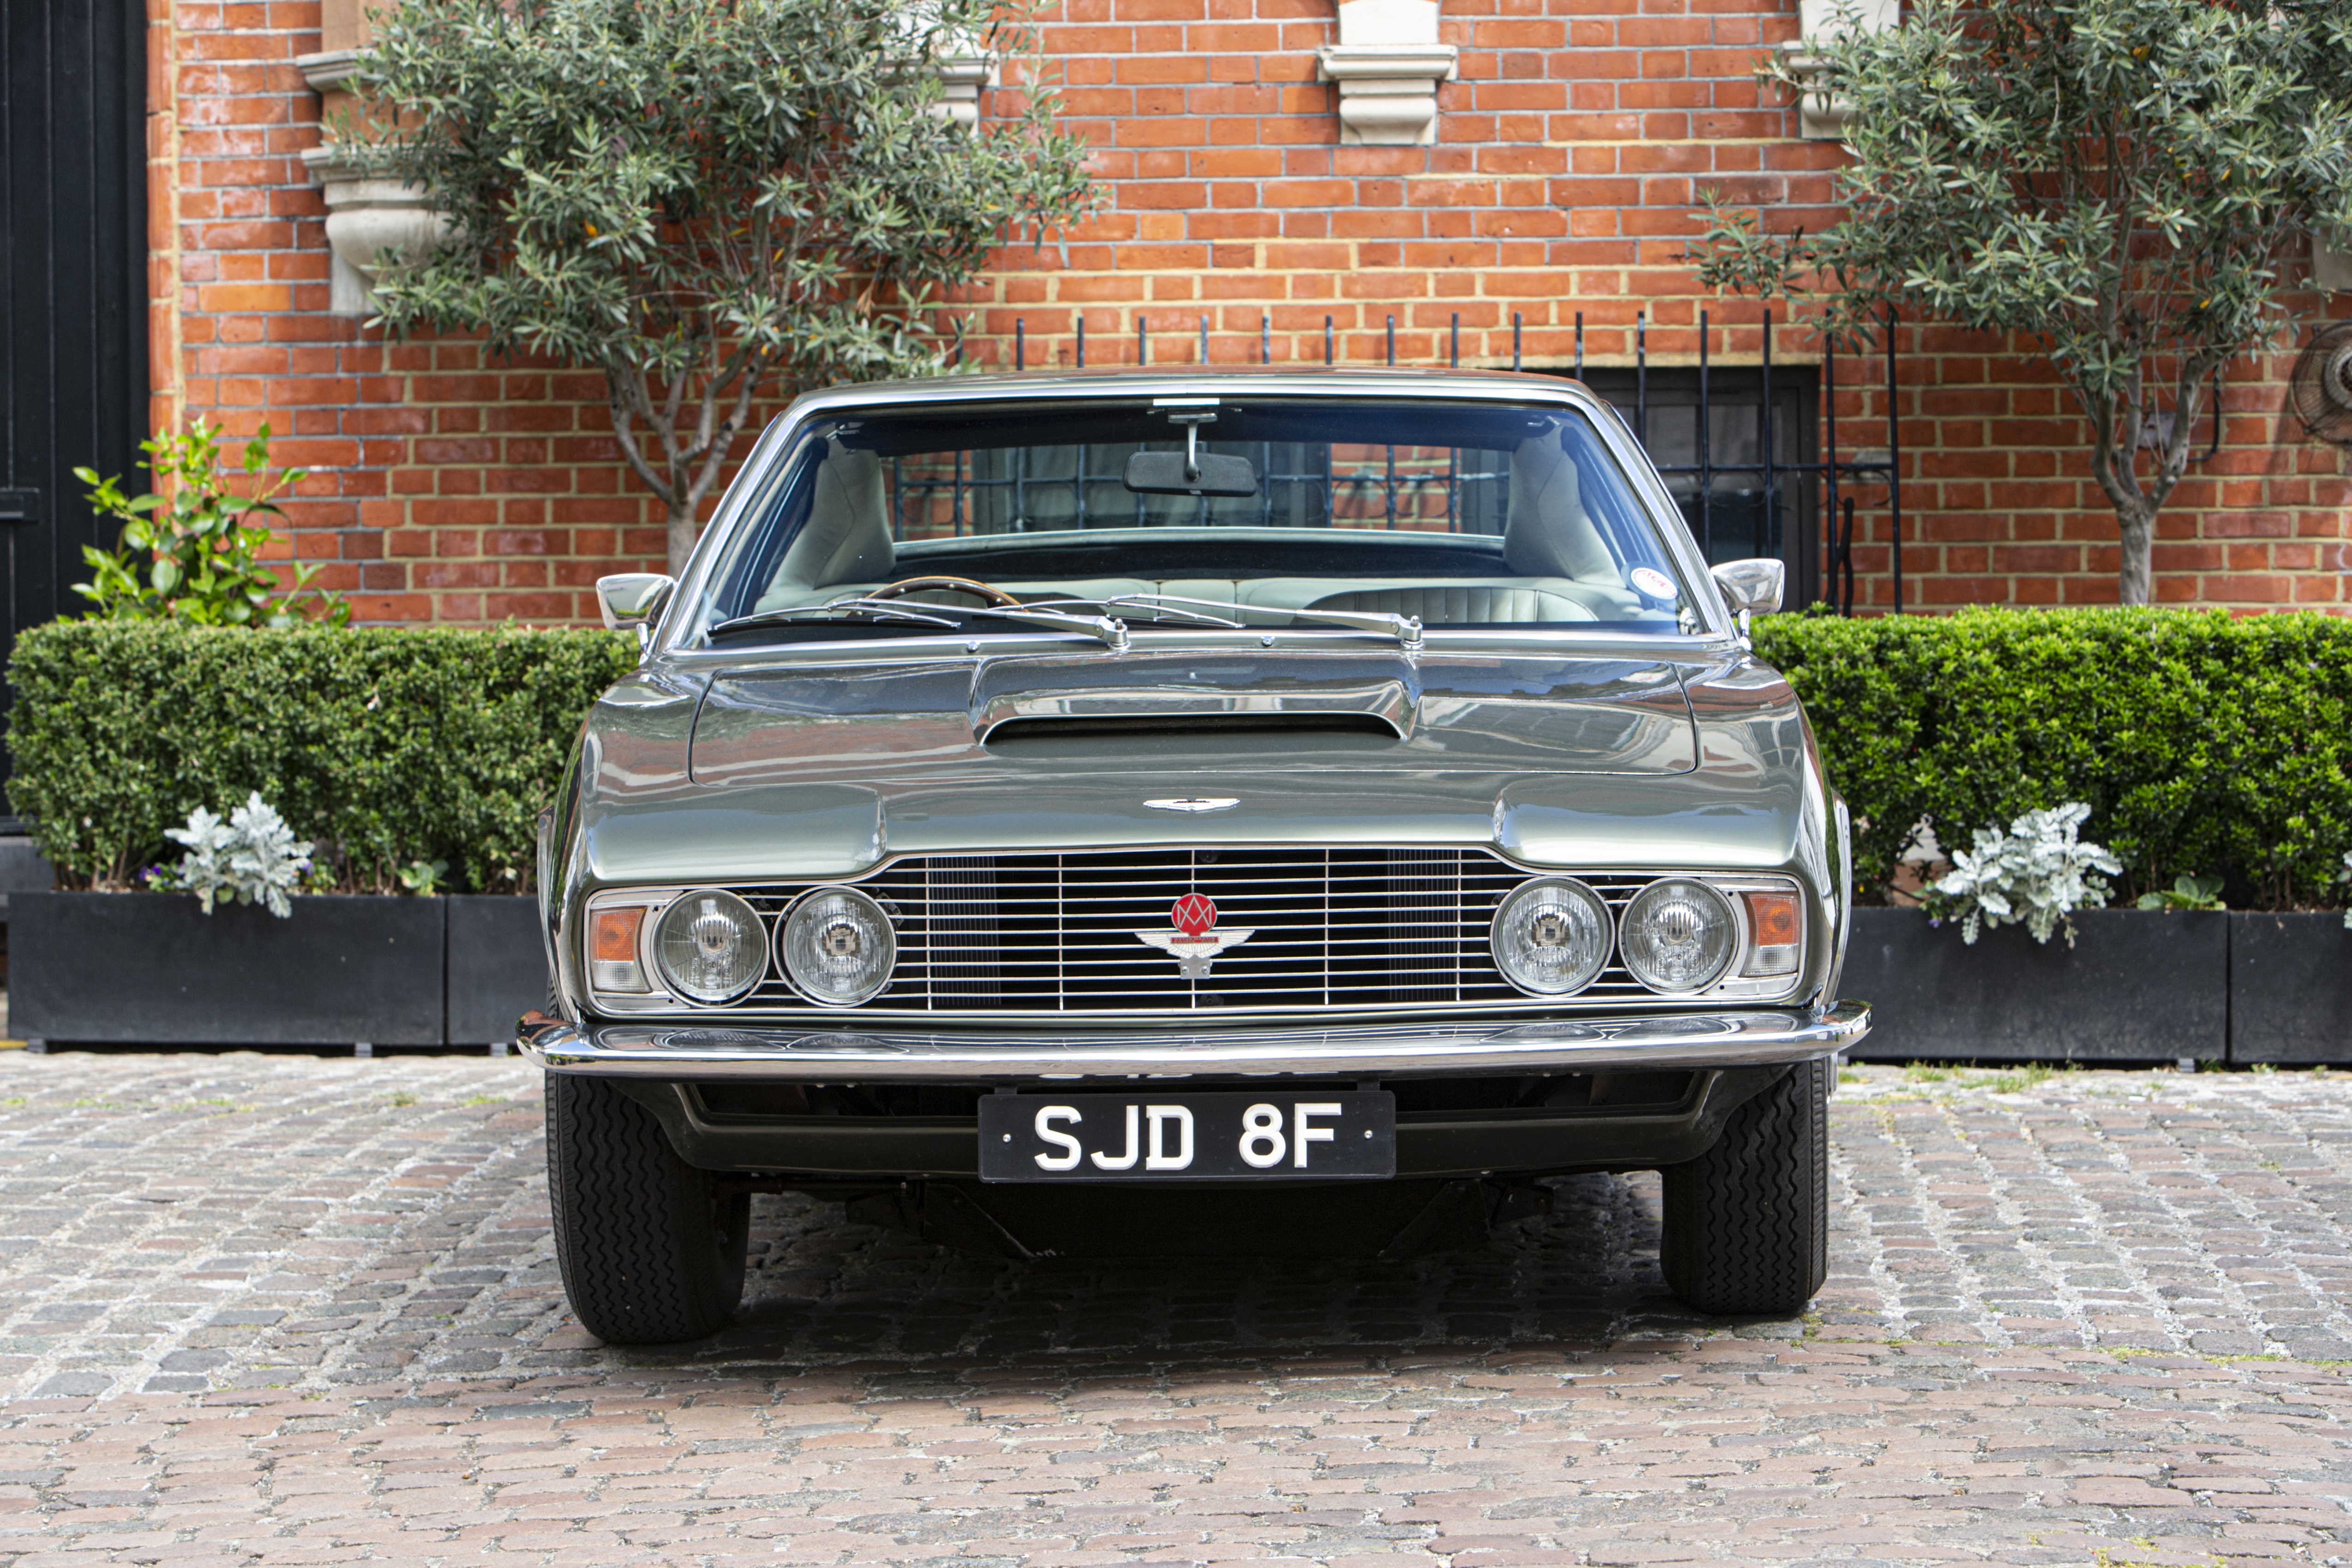 1968 Aston Martin DBS Chassis no. 400/5040/R - Image 29 of 48